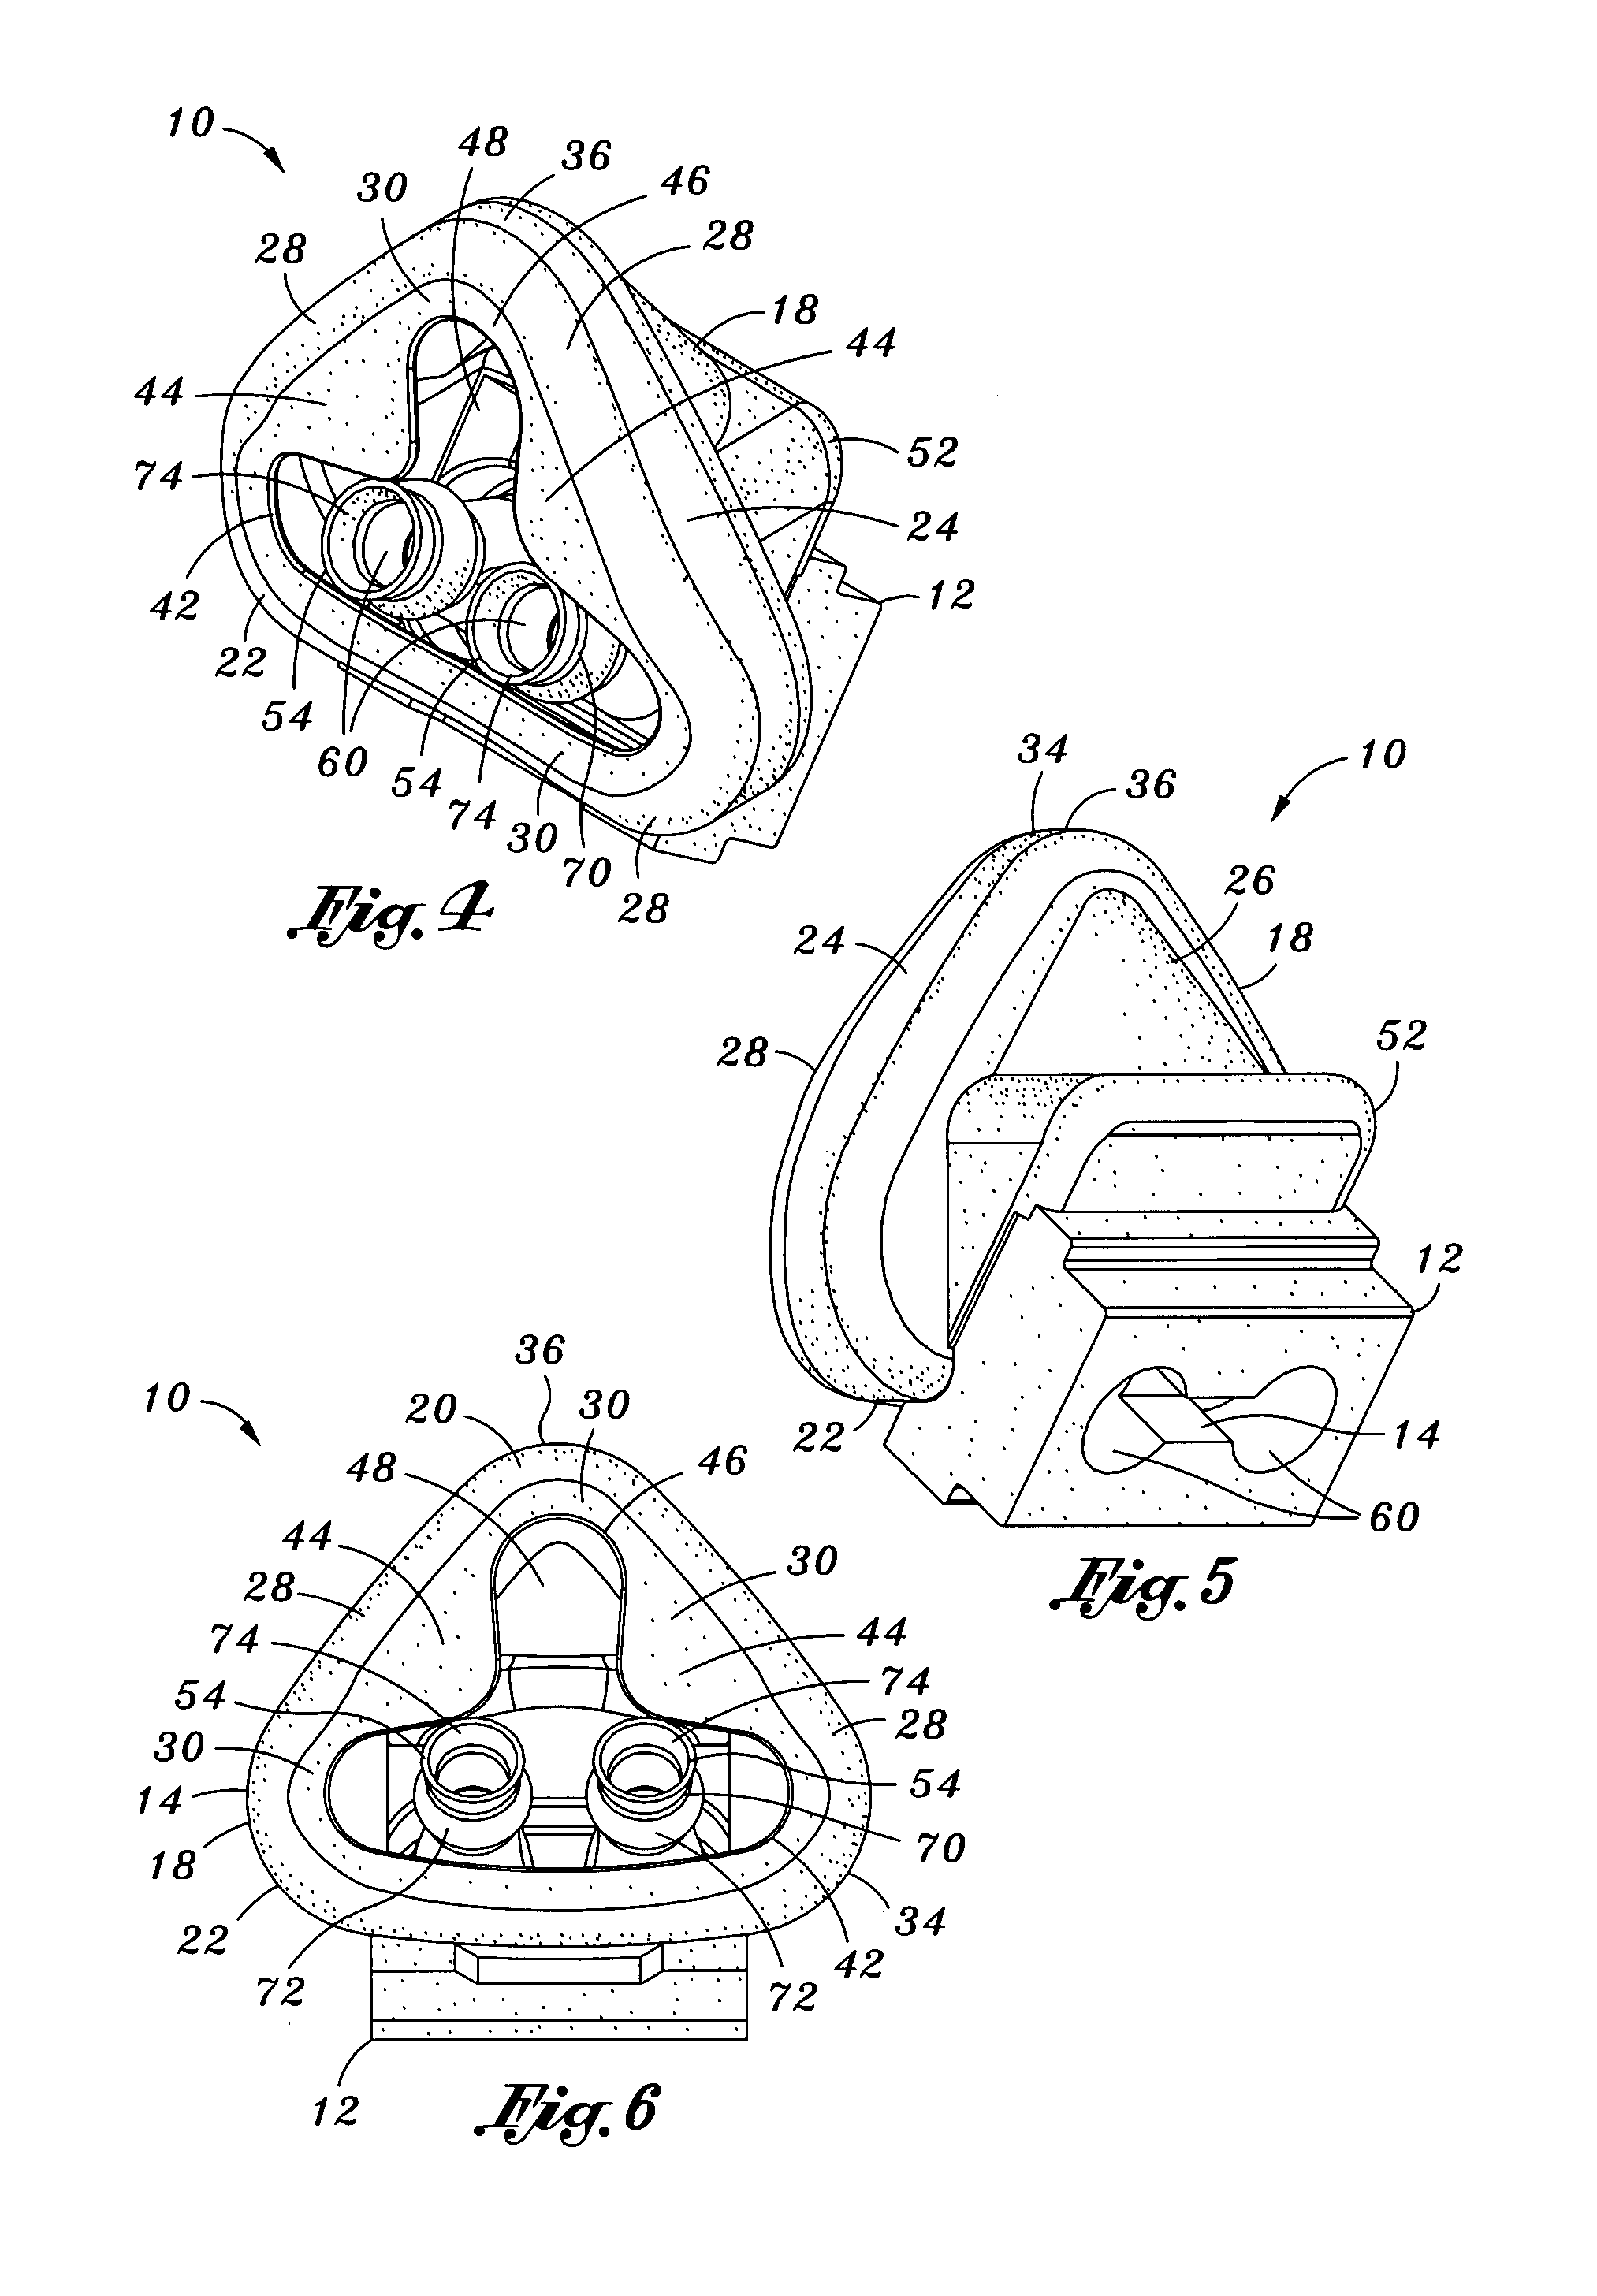 Integrated mask and prongs for nasal CPAP